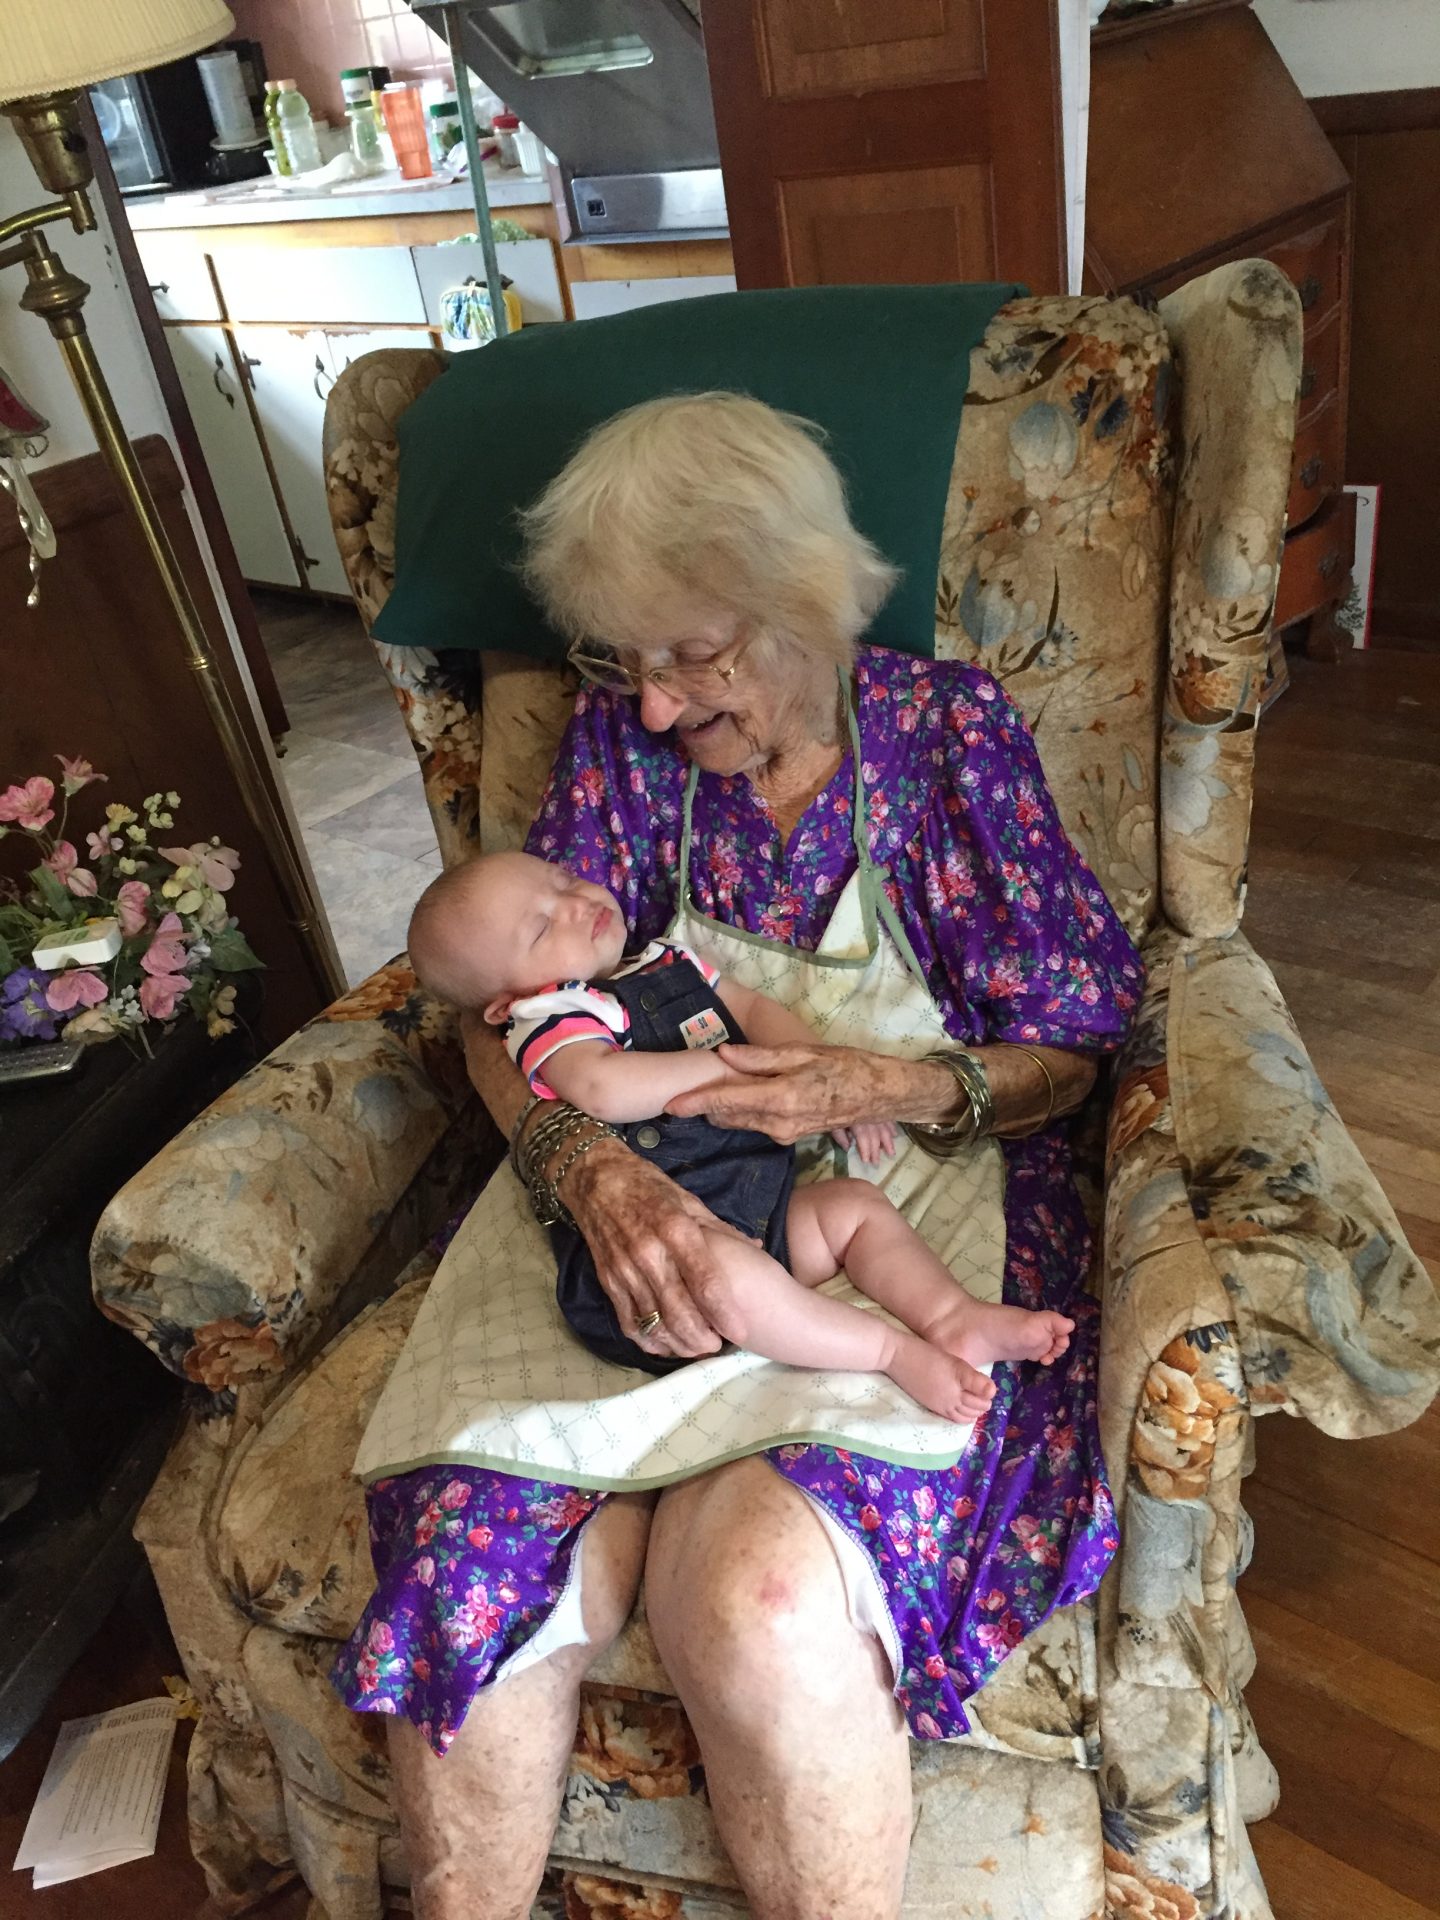 Mrs Graham (with our 1st granddaughter) our great faithful friend. We are going to miss you so much. I know your husband and babies were so excited when you arrived in heaven. We love you so much!<br />
The Wootens